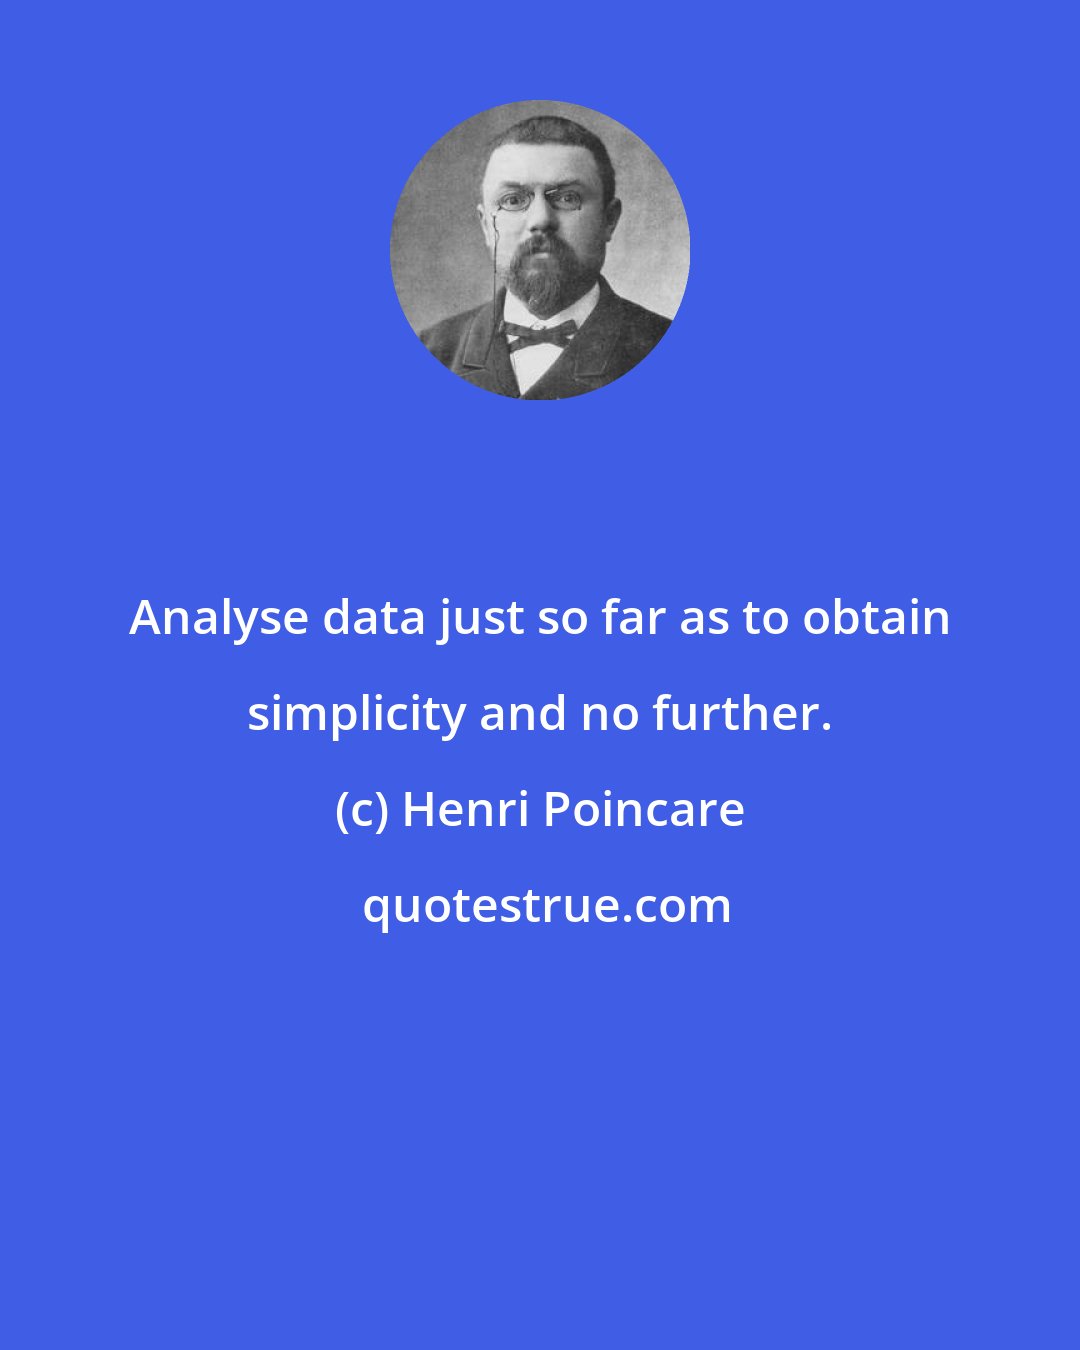 Henri Poincare: Analyse data just so far as to obtain simplicity and no further.